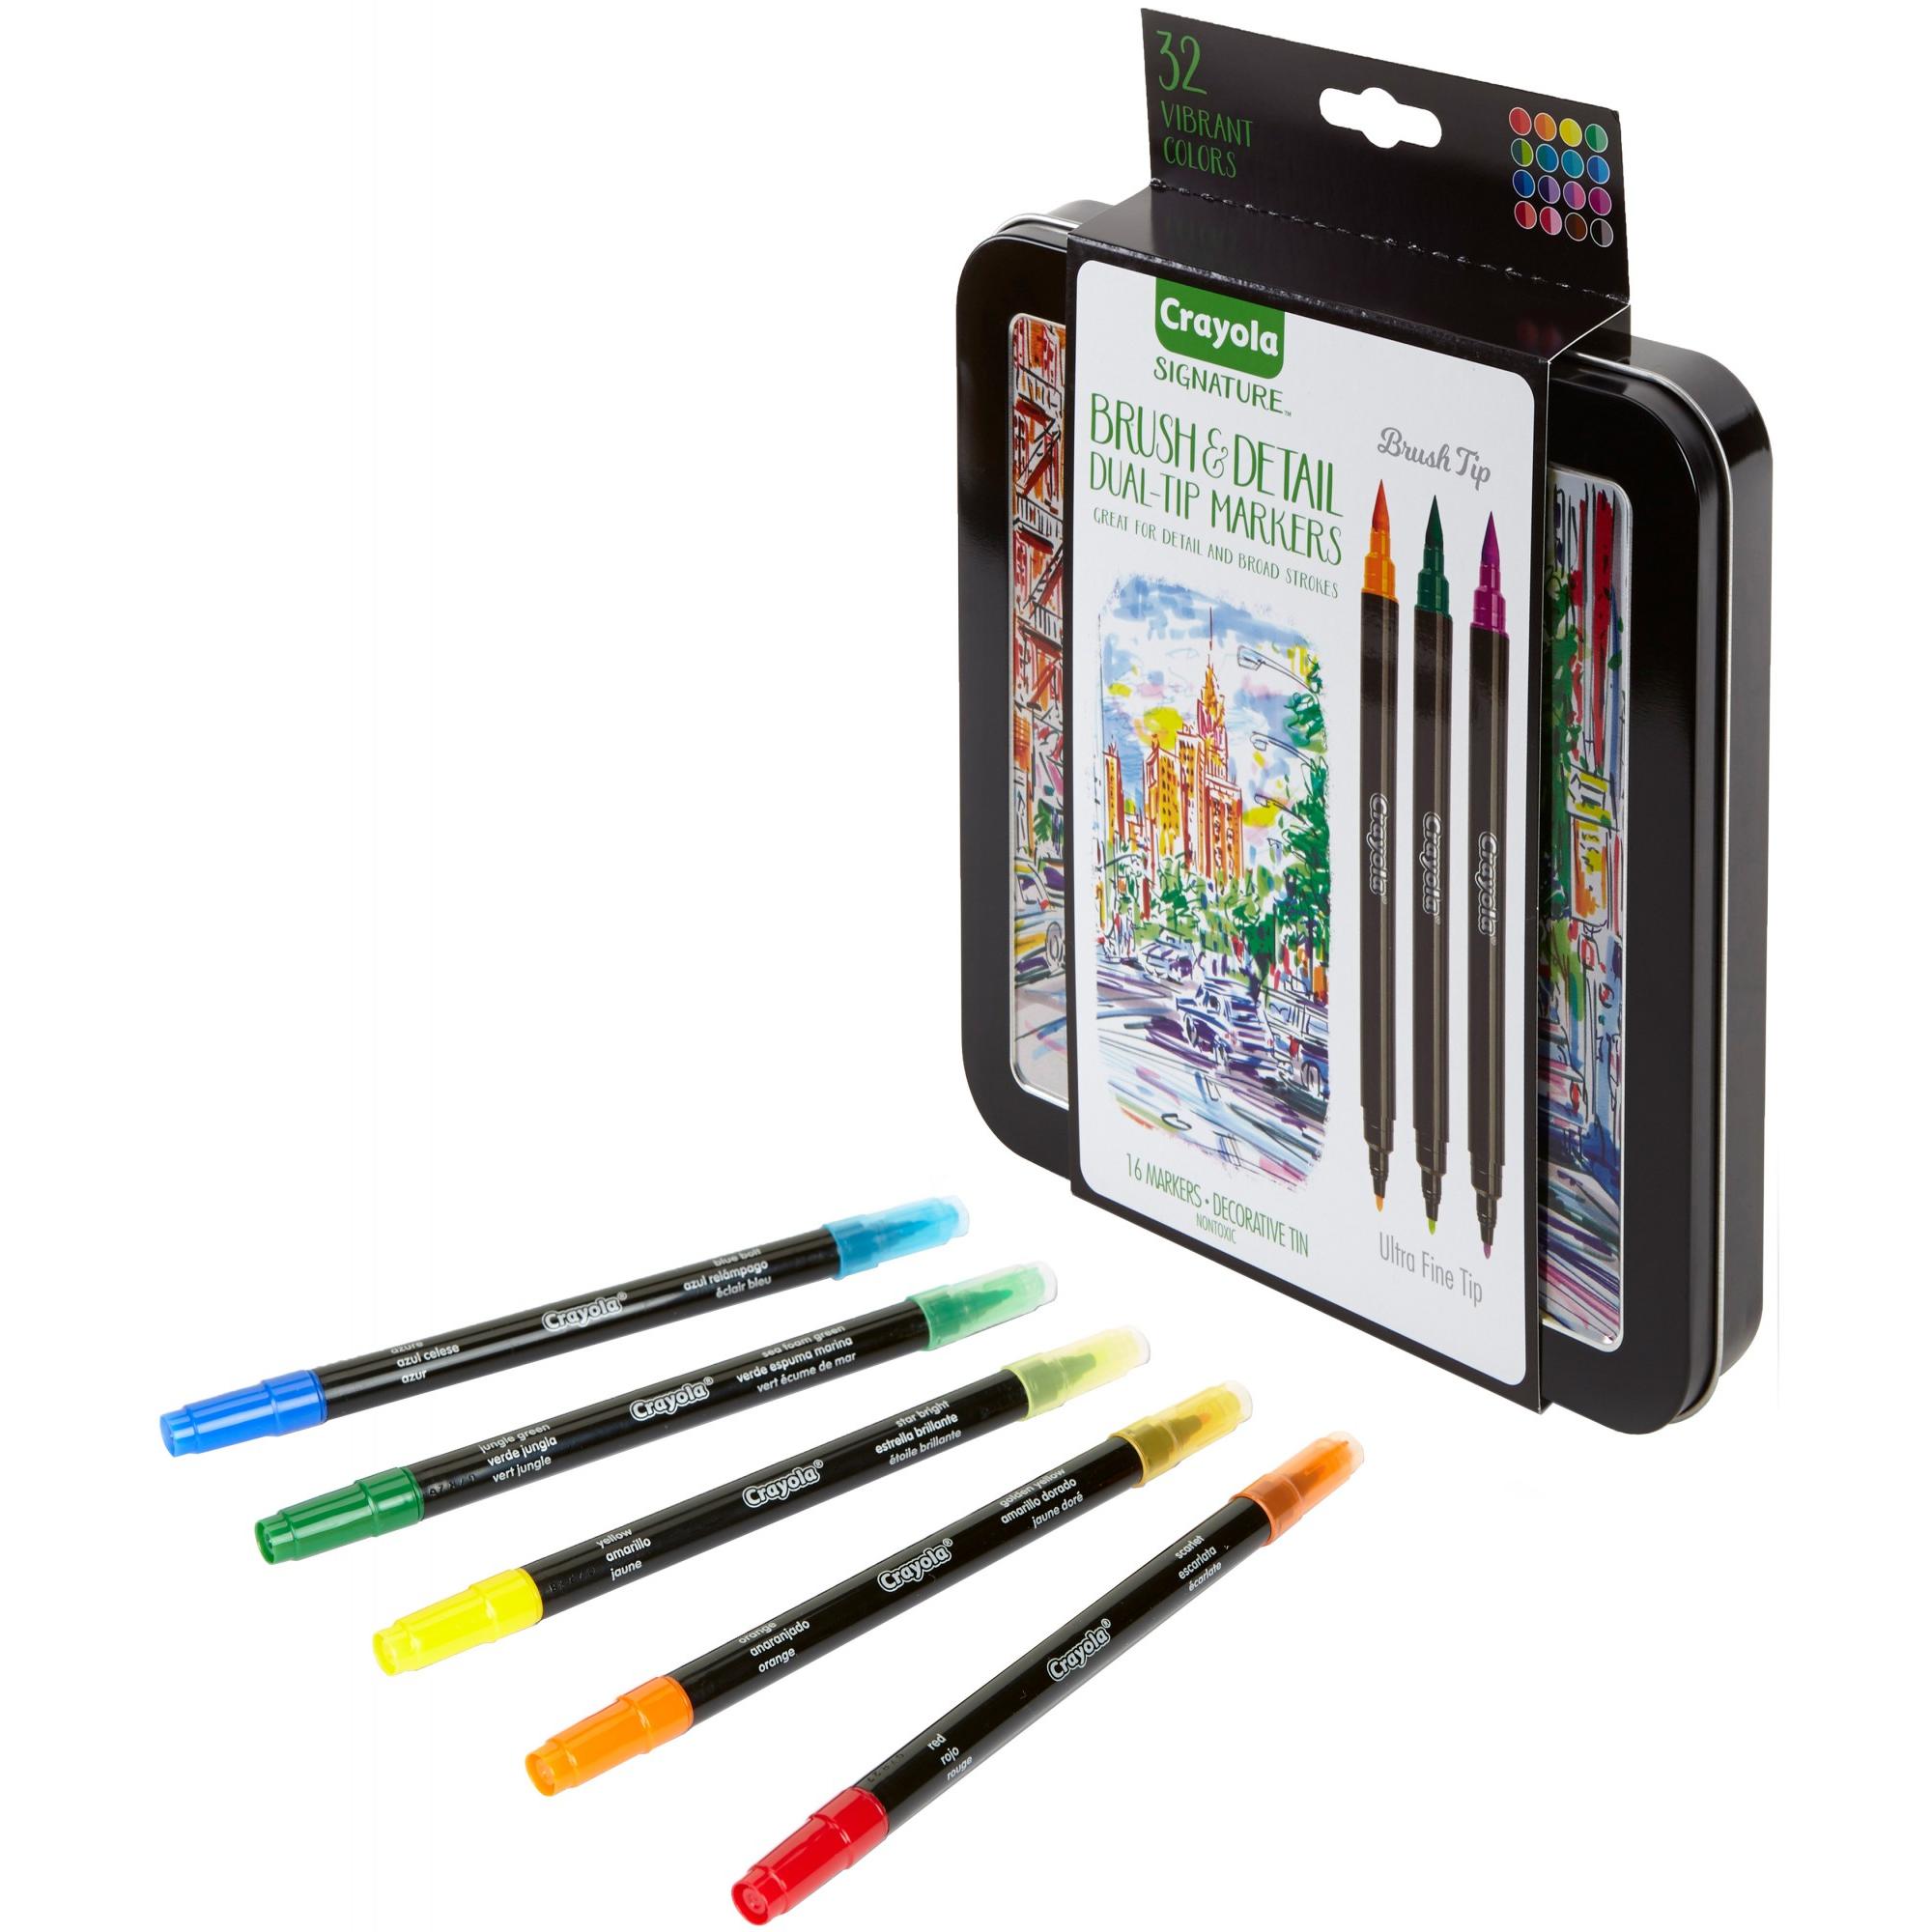 Brush & Detail Dual Ended Markers, X-Fine Brush/Bullet, Assorted Colors, 16/ST